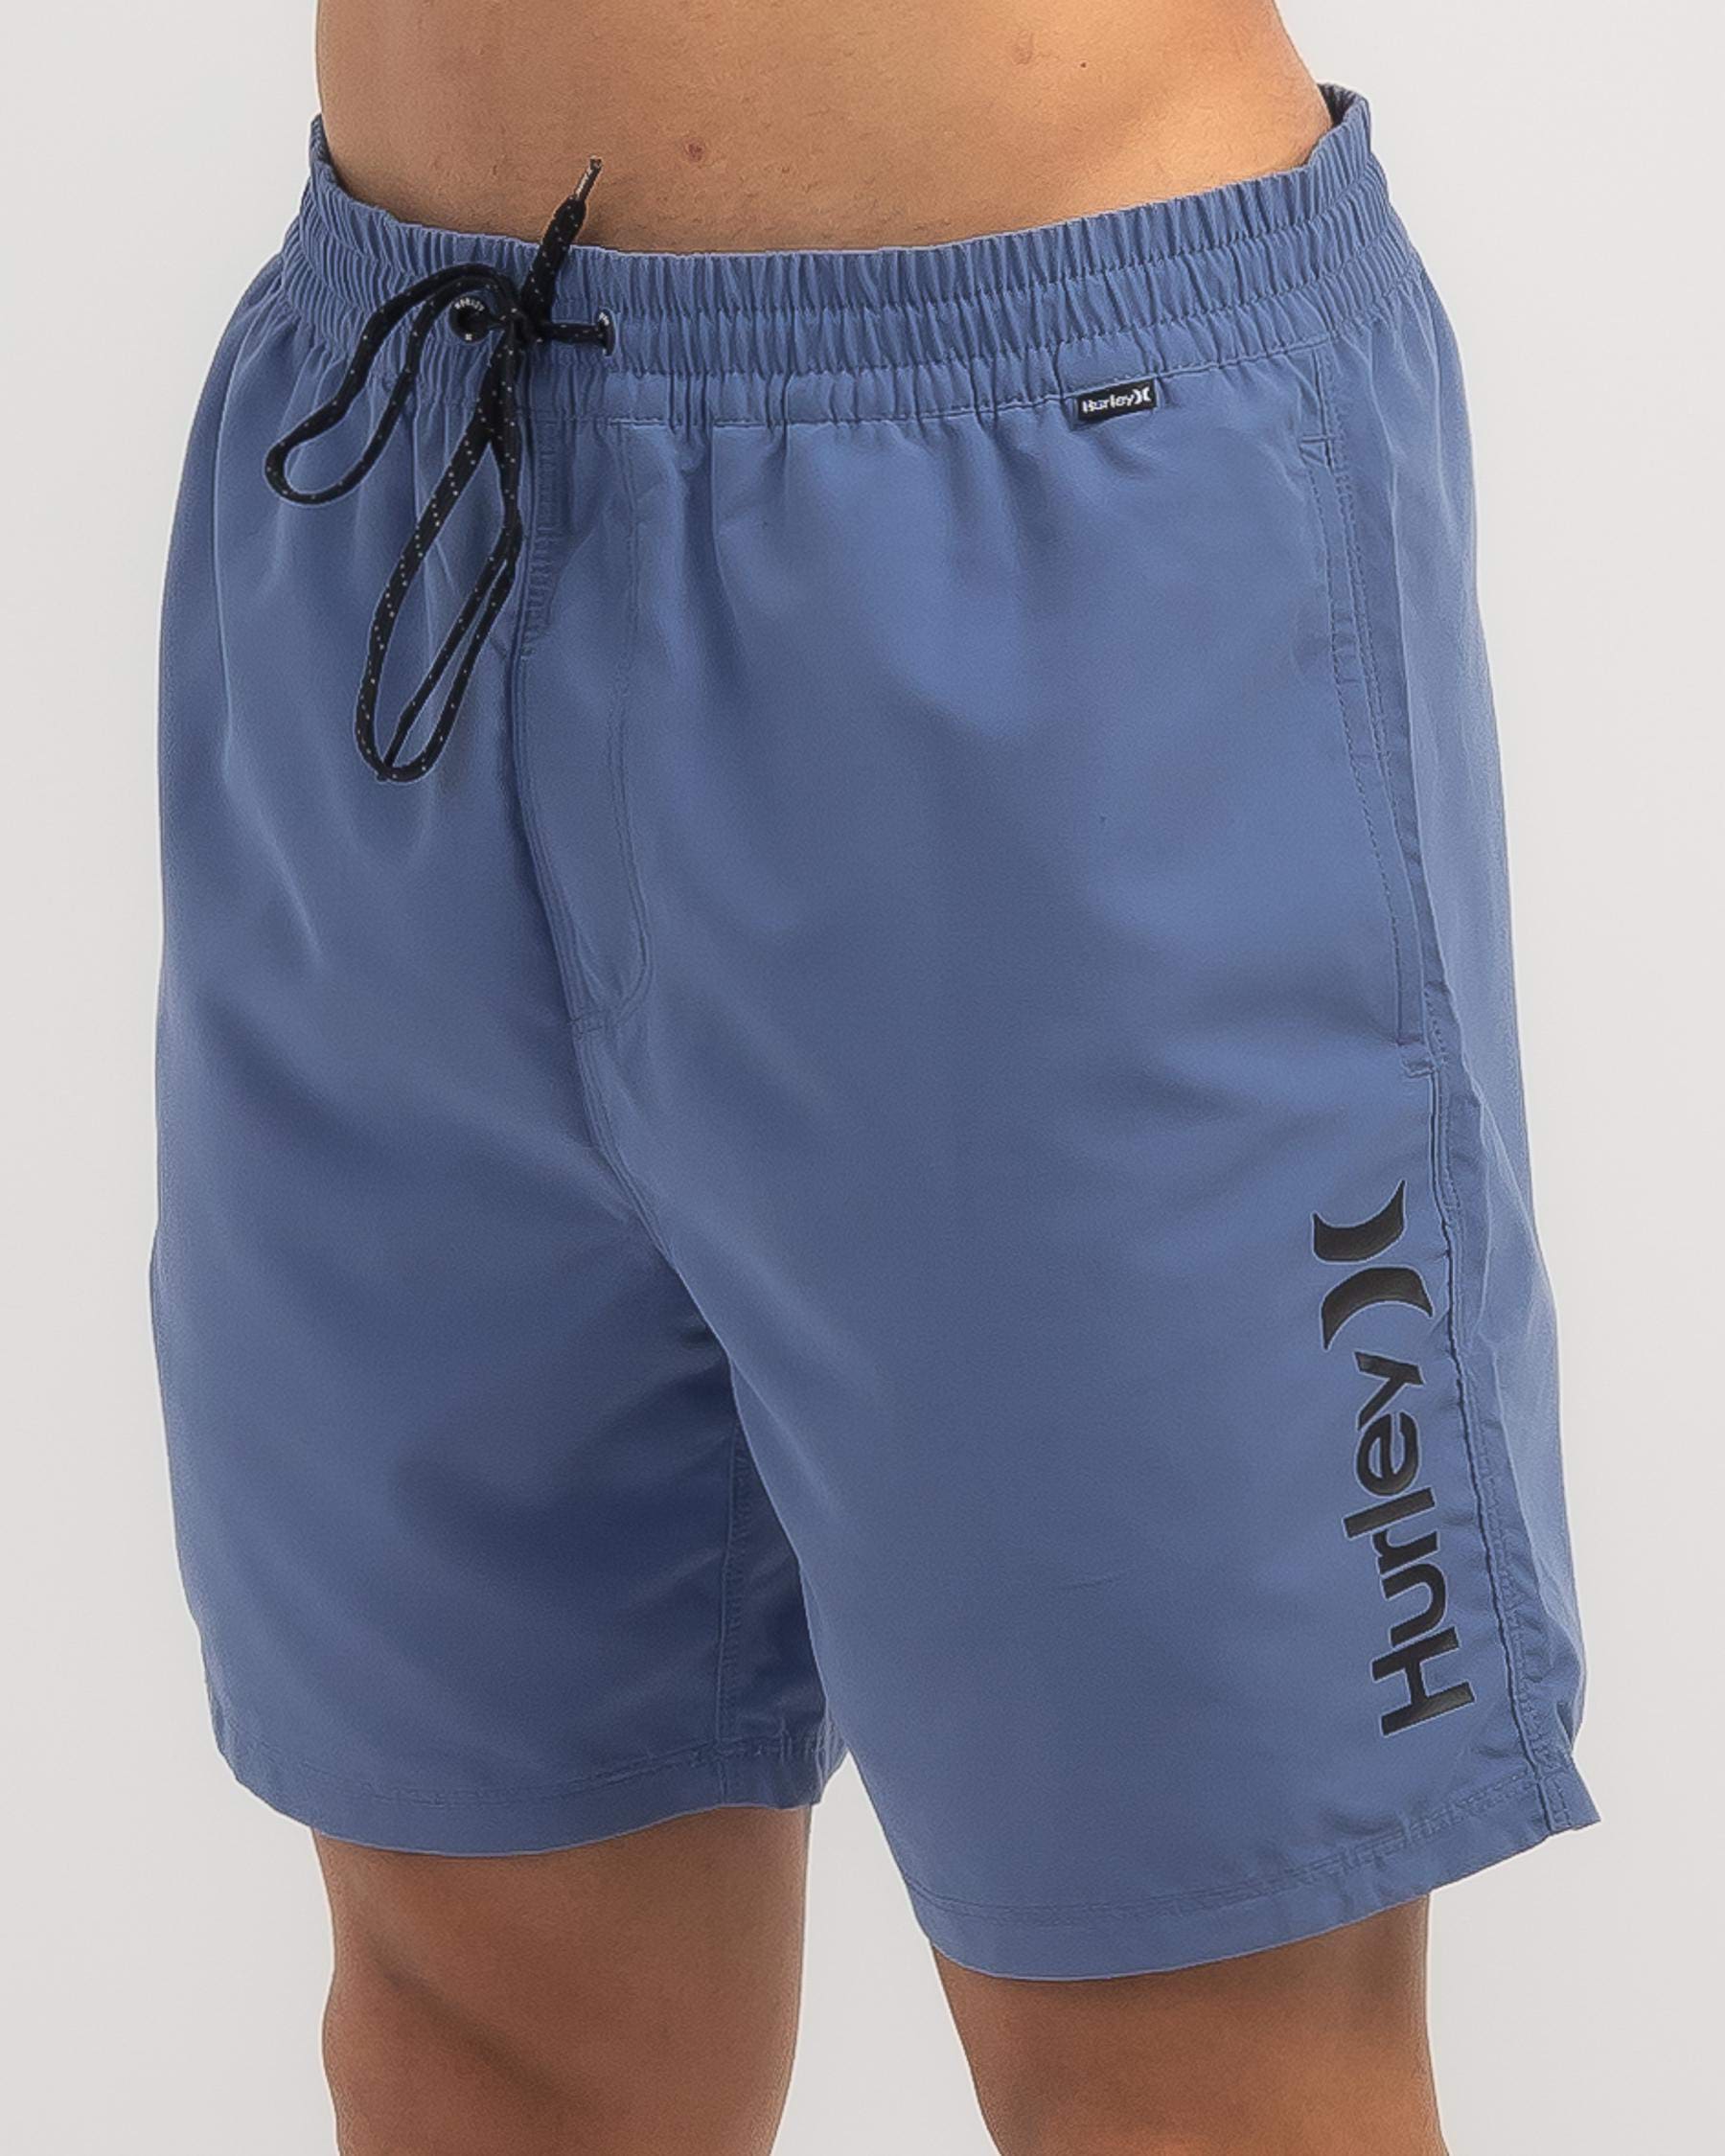 Hurley Hurley One and Only Volley Board Shorts In Blue - FREE* Shipping ...